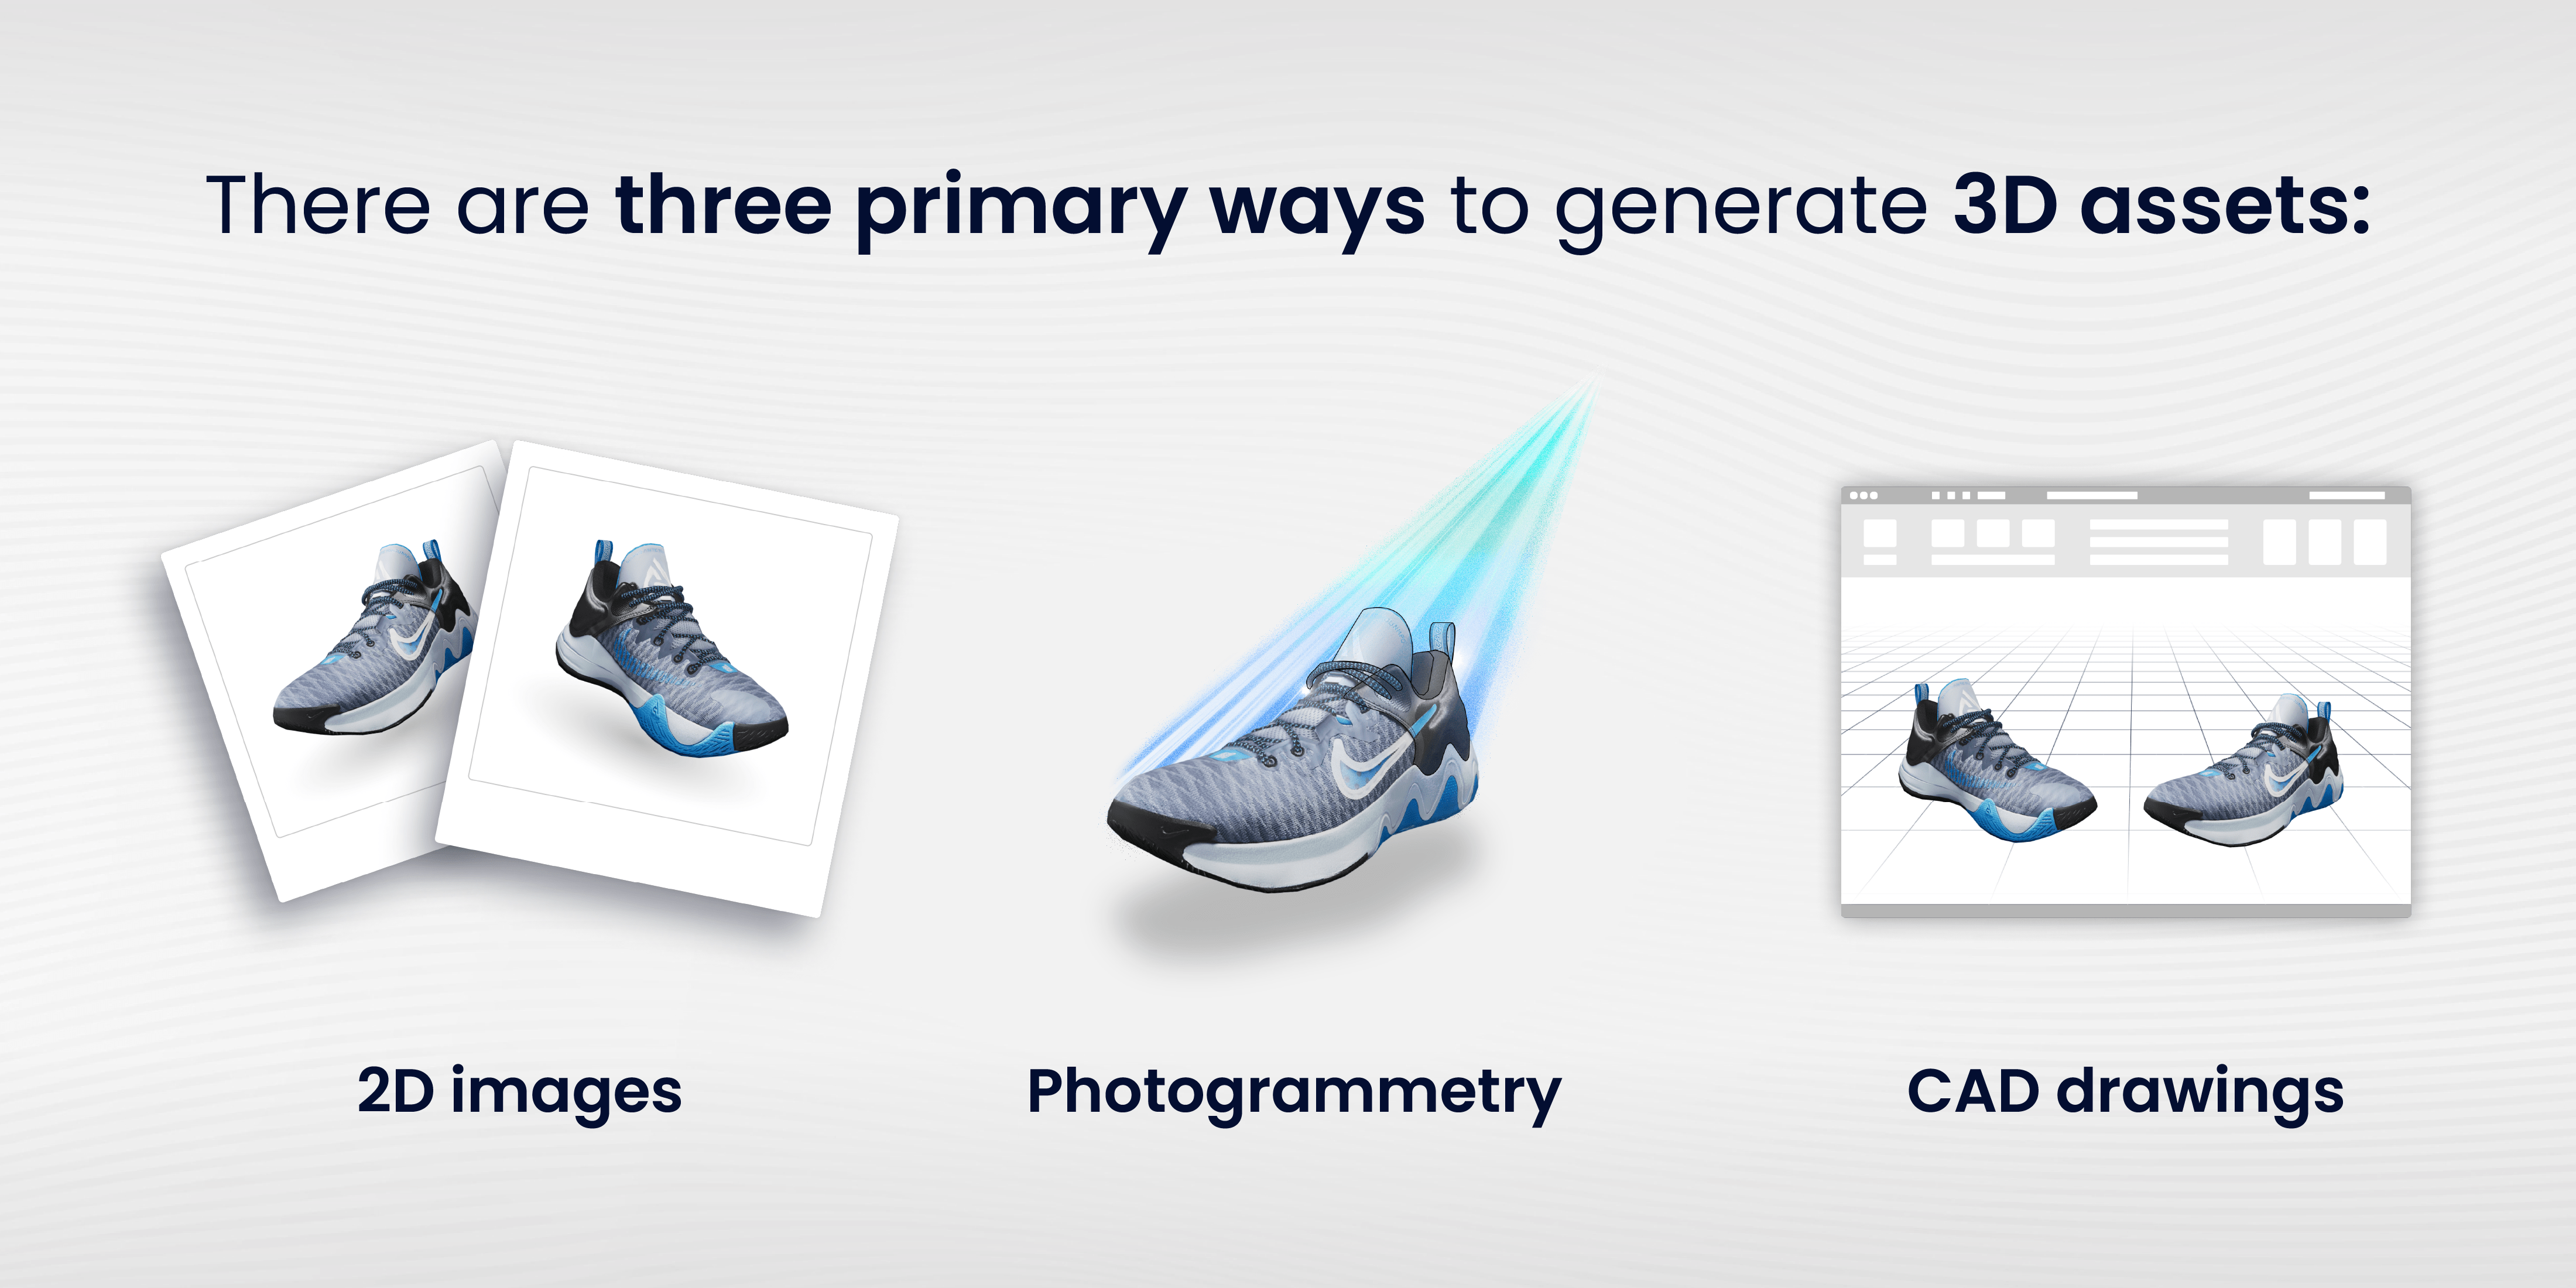 Three primary ways to generate 3D assets: 2D images, Photogrammetry, CAD drawings